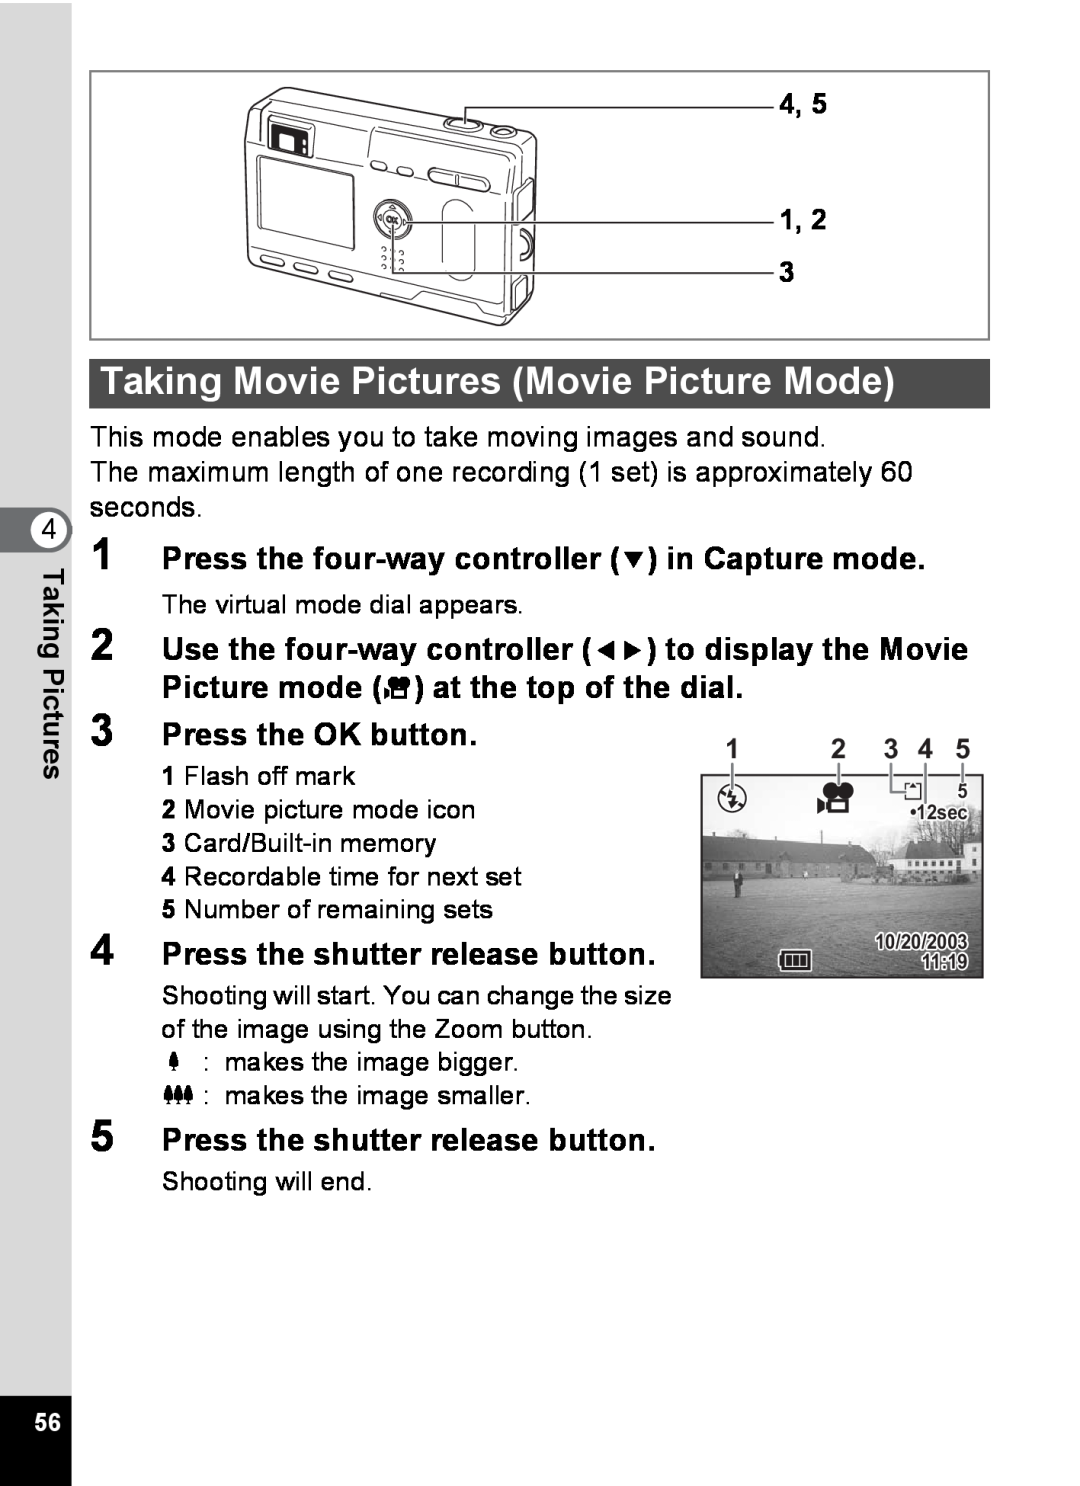 Pentax S4 manual Taking Movie Pictures Movie Picture Mode, Press the four-way controller 3 in Capture mode, 1, 2, 2 3 4 